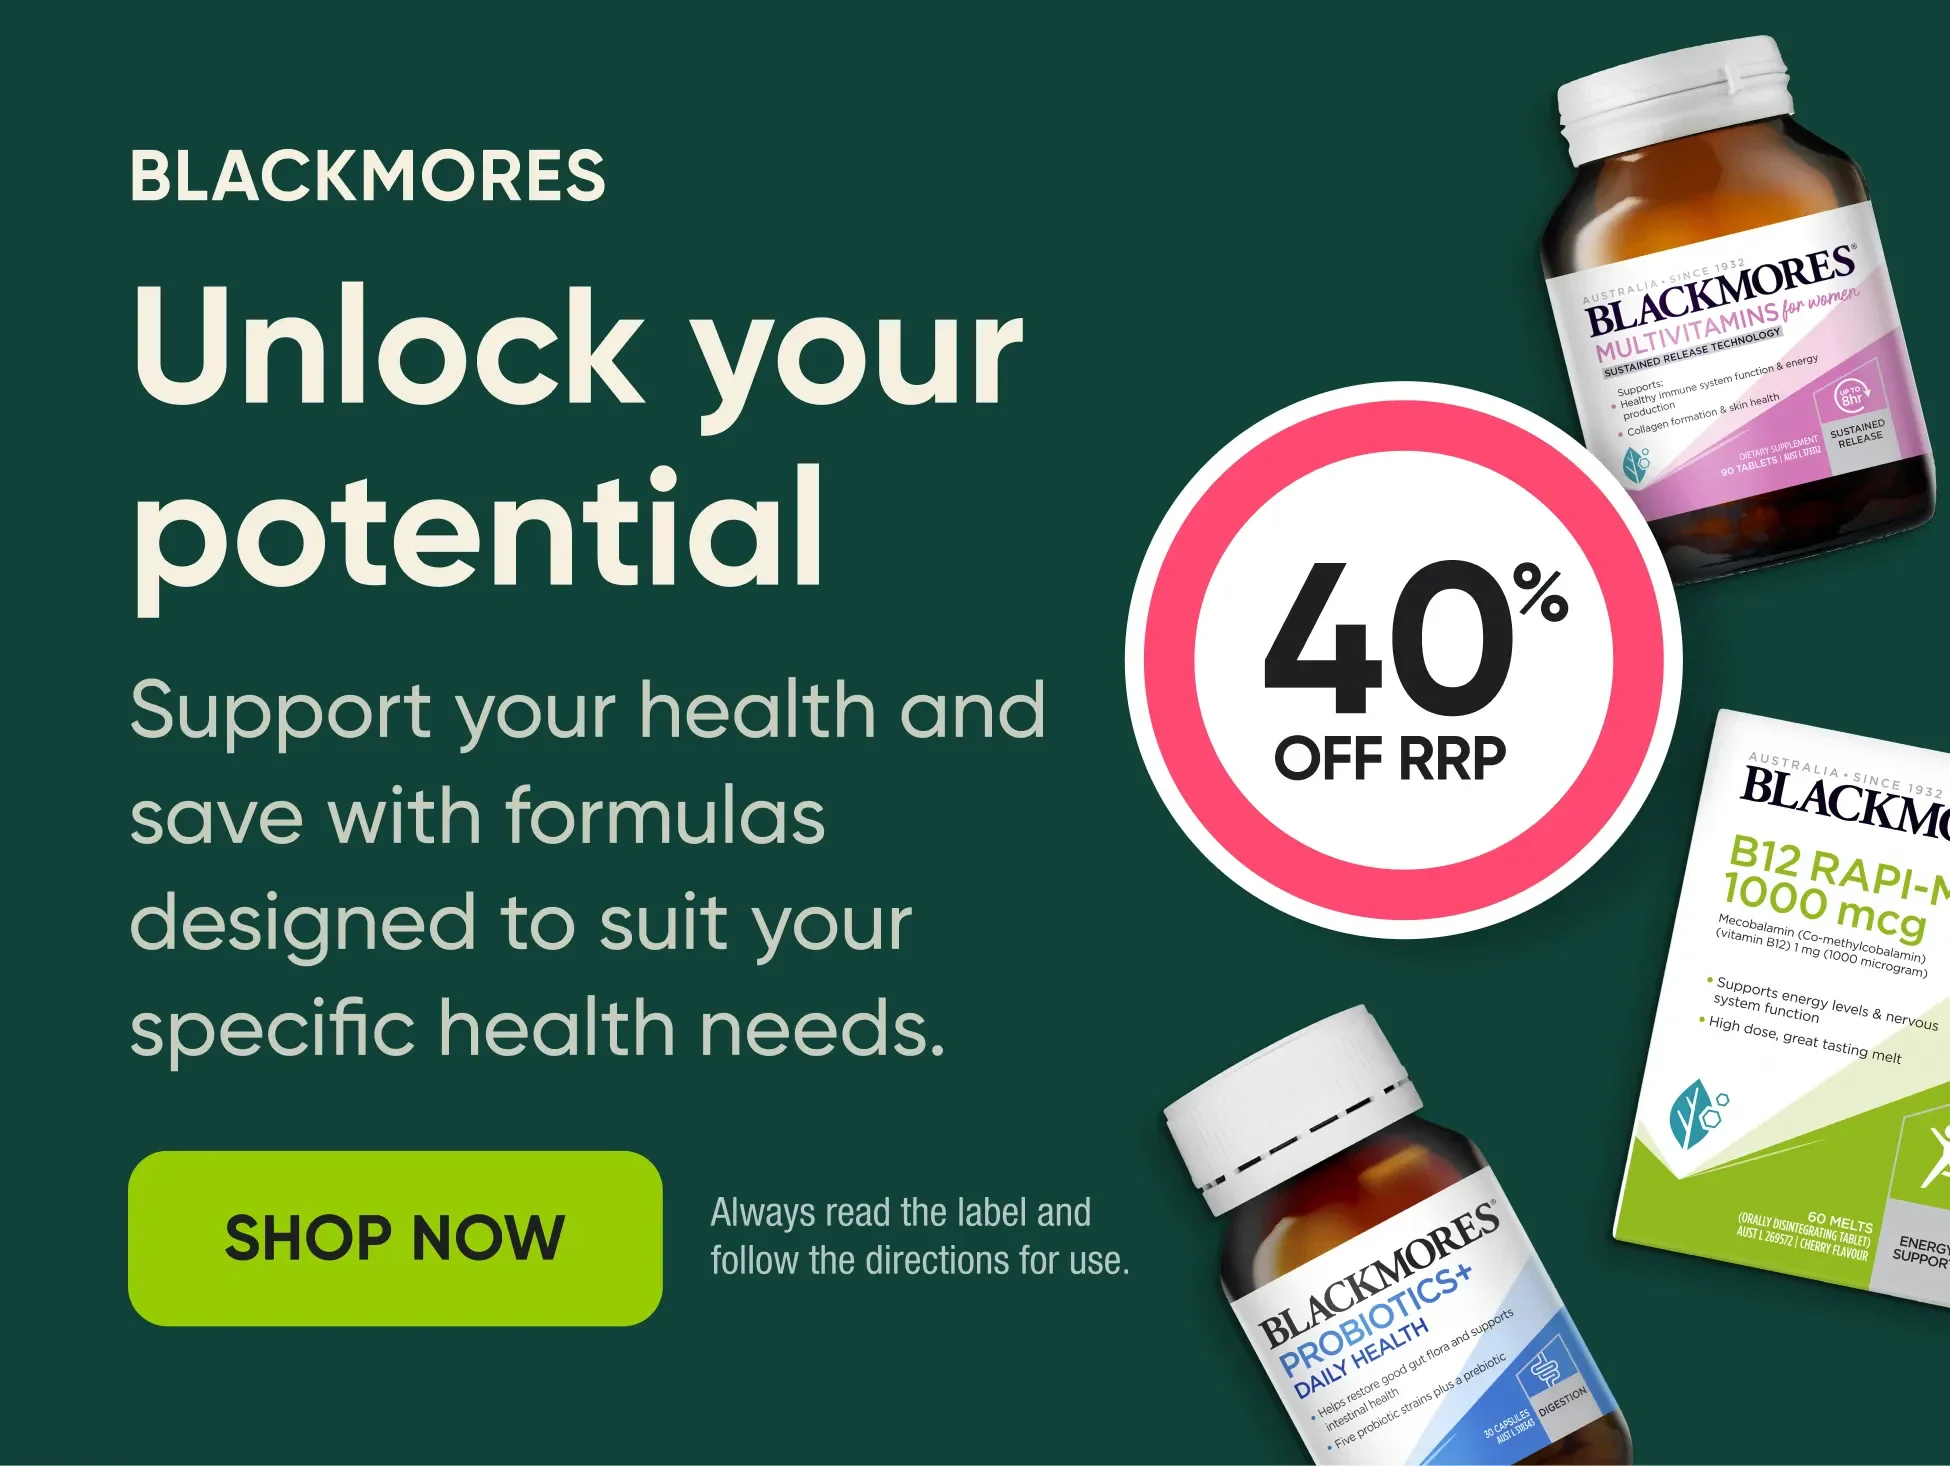 Blackmores: Unlock your potential - Support your health and save with expertly-crafted formulas designed to suit your specific health needs.